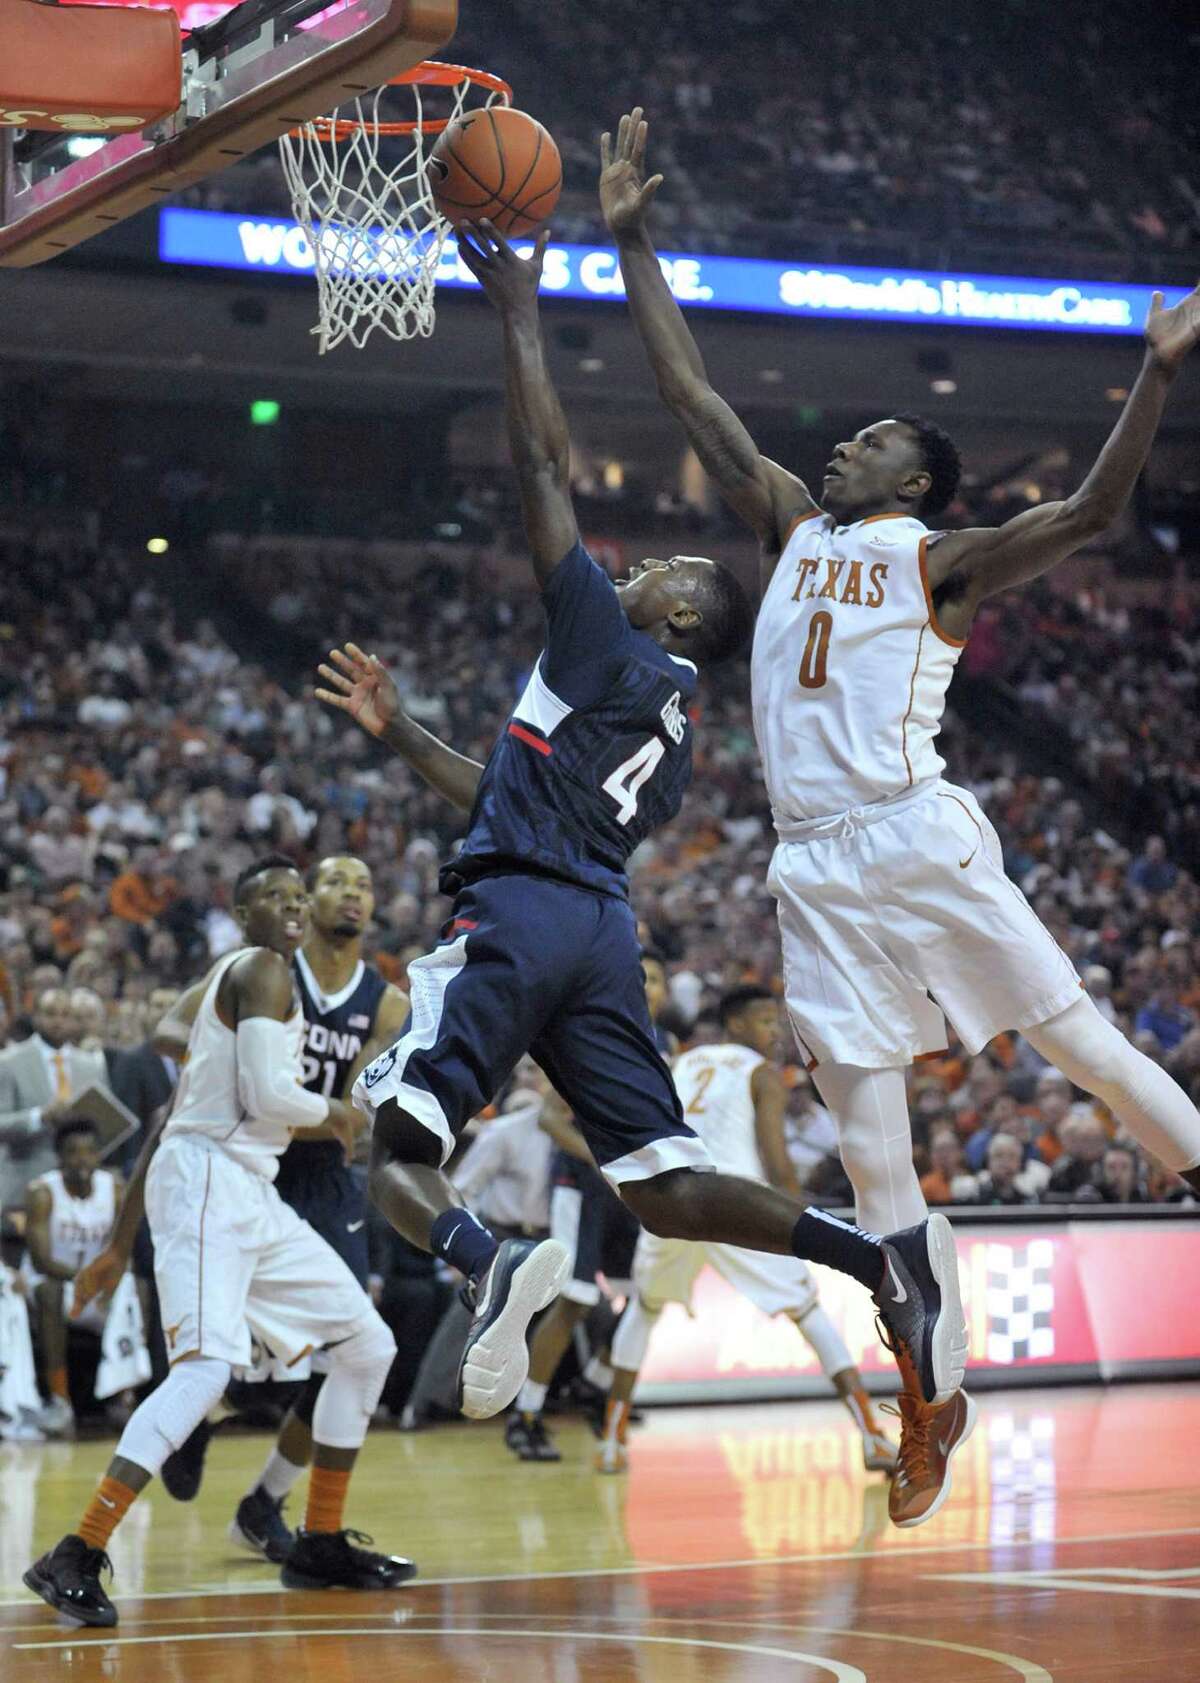 Connecticut Huskies guard Sterling Gibbs (4) drives to the basket as Texas Longhorns guard Tevin Mack (0) defends on Tuesday, Dec. 29, 2015, at the Frank Erwin Center in Austin, Texas. (Brad Horrigan/Hartford Courant/TNS)